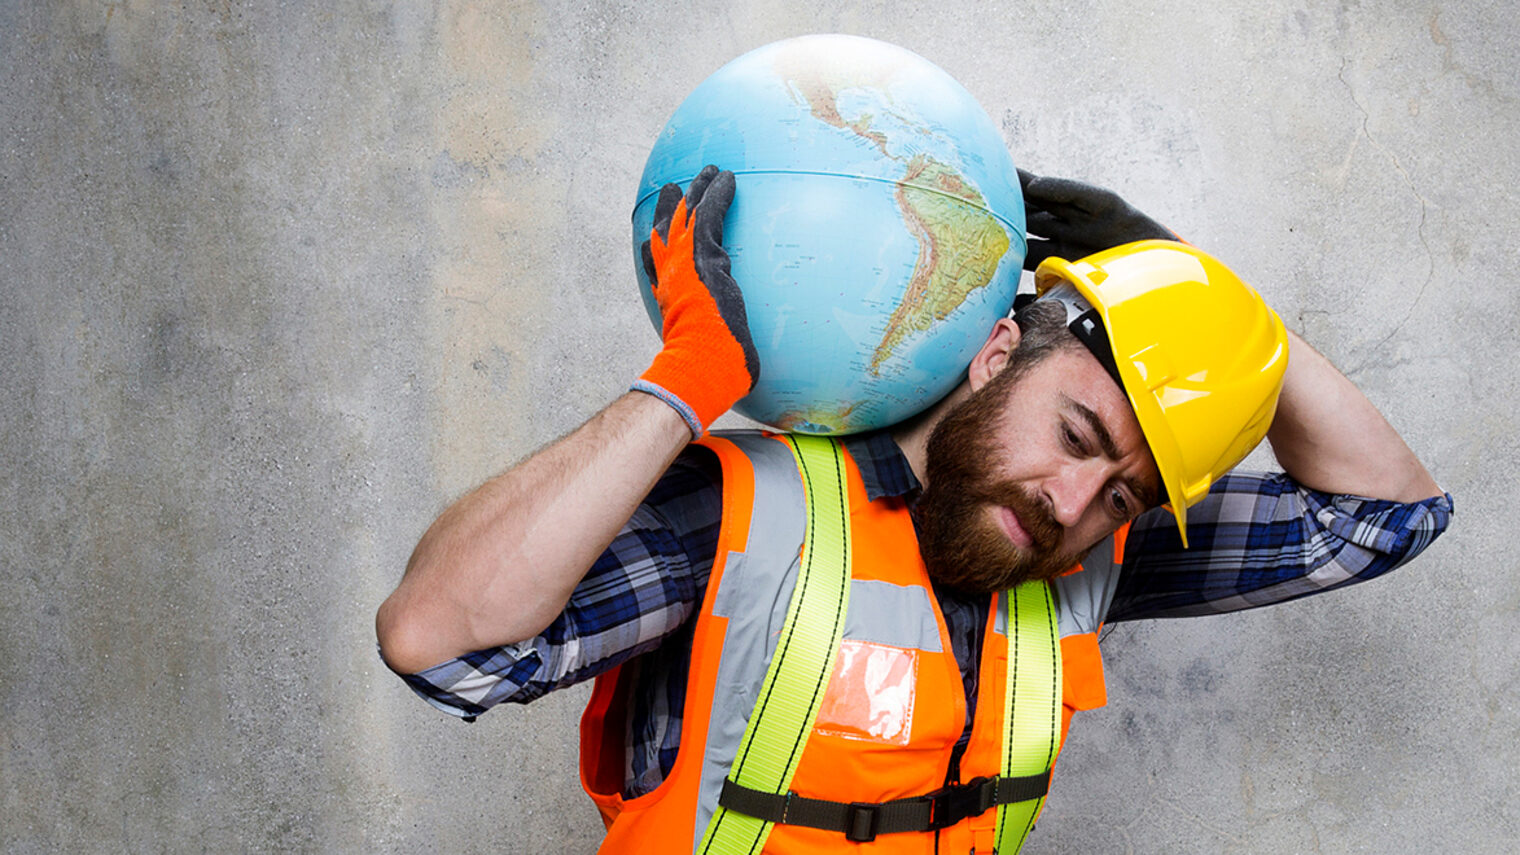 Construction worker carrying an earth globe. Schlagwort(e): White Background, Real People, Male Beauty, Construction Worker, Fashion, Fuel and Power Generation, Working Class, Toothy Smile, Heavy, Men, Tool Belt, Home Improvement, Hardhat, Maintenance Engineer, Electrician, Repairman, Building Contractor, Foreman, Carpenter, Mechanic, Smiling, Repairing, Carrying, Working, Technician, World Map, One Person, Toughness, Strength, Denim, Construction, Looking At Camera, Front View, Cheerful, Human Neck, Muscular Build, Manual Worker, Engineer, Occupation, People, Earth, Work Tool, Globe, Isolated On White, Belt